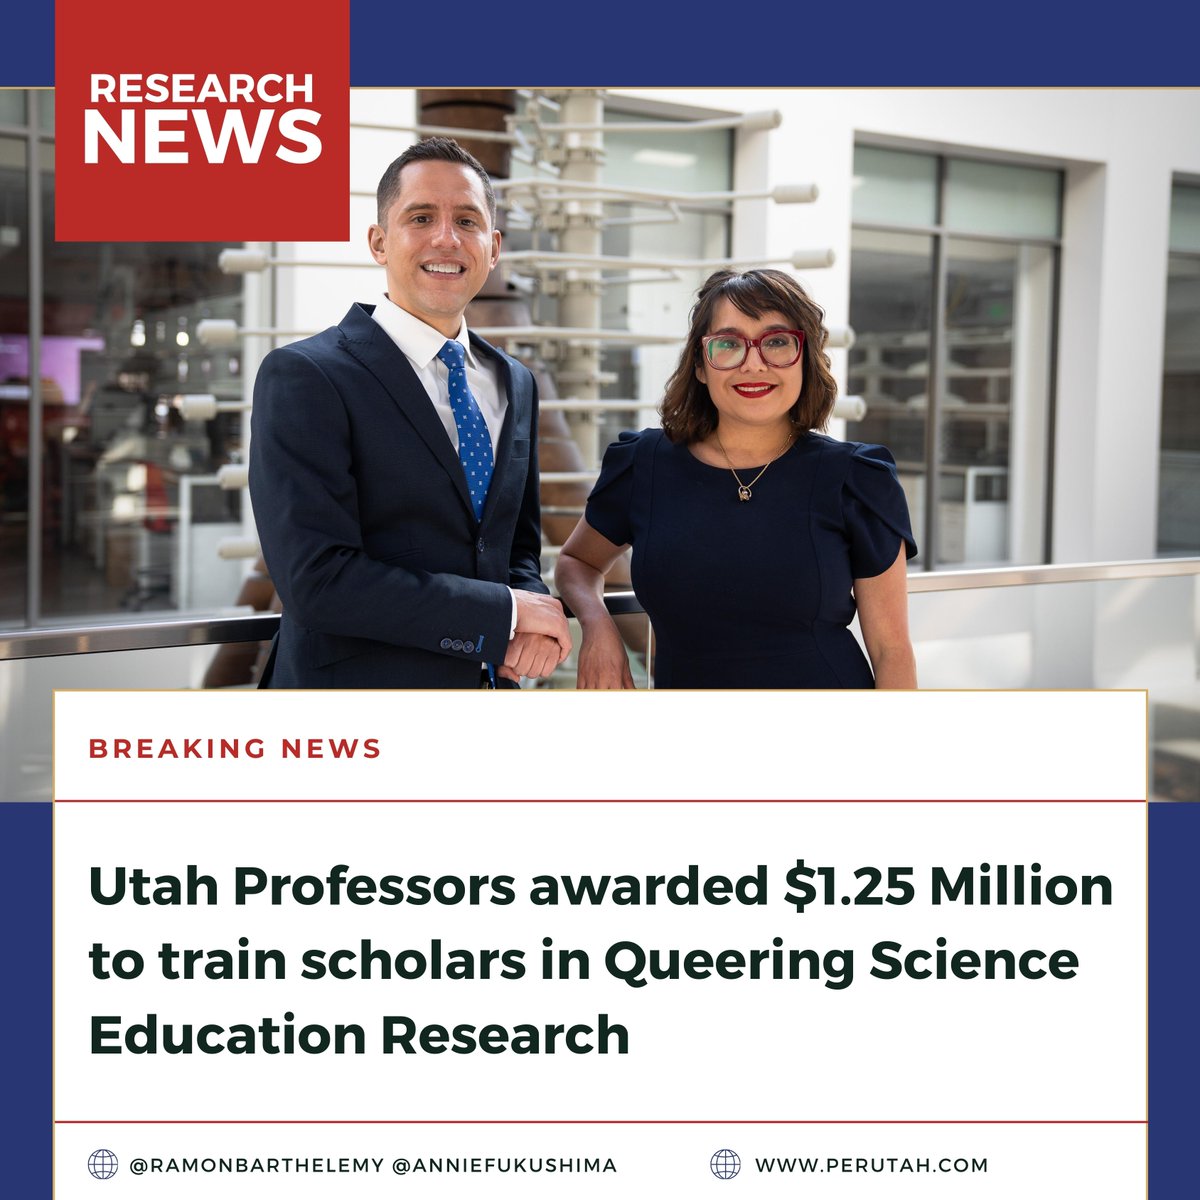 Dr. @anniefukushima and I have been awarded $1.25M to train postdocs to queer methods in STEM education research! Read more: tinyurl.com/nht6eesx @500QueerSci @UUtah @uofu_science @uofuedi @uofutransform @OUTinSTEM @OuttoInnovate @LGBTSTEM @fox13 @sciam @Nature @ScienceNews